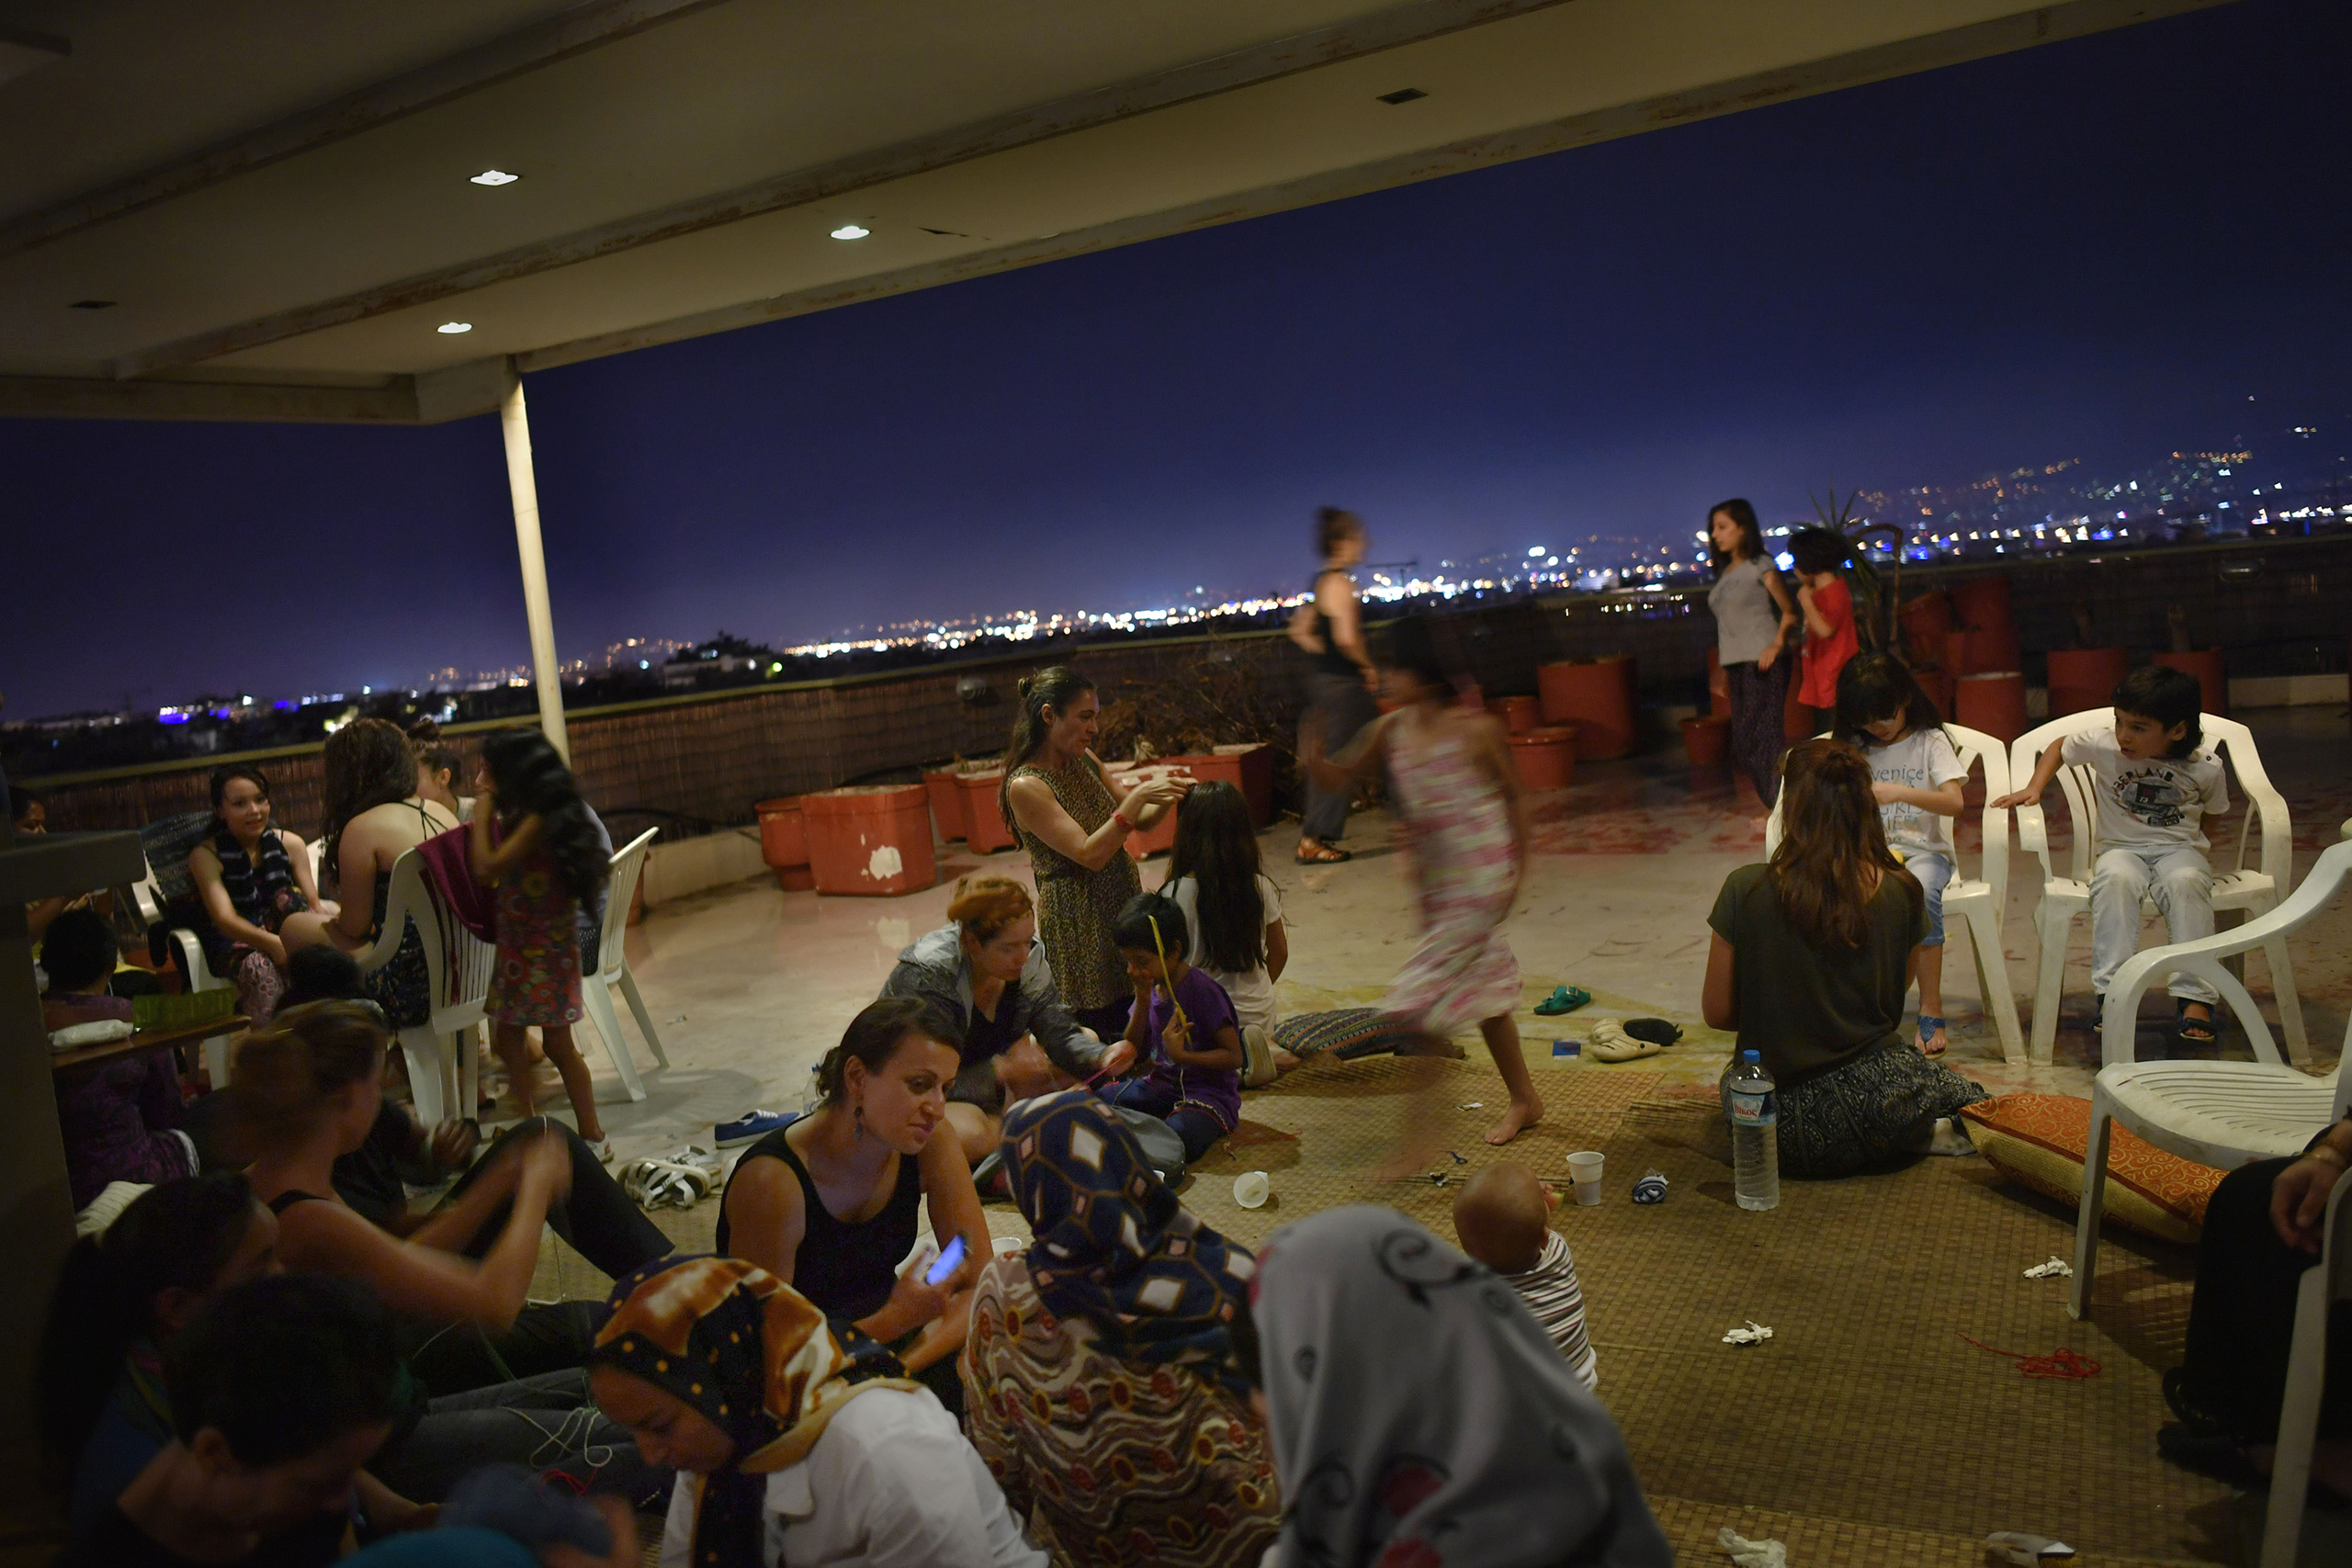 Refugee residents of the hotel organize a women-only dance party several nights a week on the rooftop terrace. It’s an opportunity for the women, many of them conservative Muslims from Syria, Iraq and Afghanistan, to relax, take off their headscarves and smoke hookah without worrying about prying male eyes. (Lynsey Addario—Getty Images Reportage for TIME)